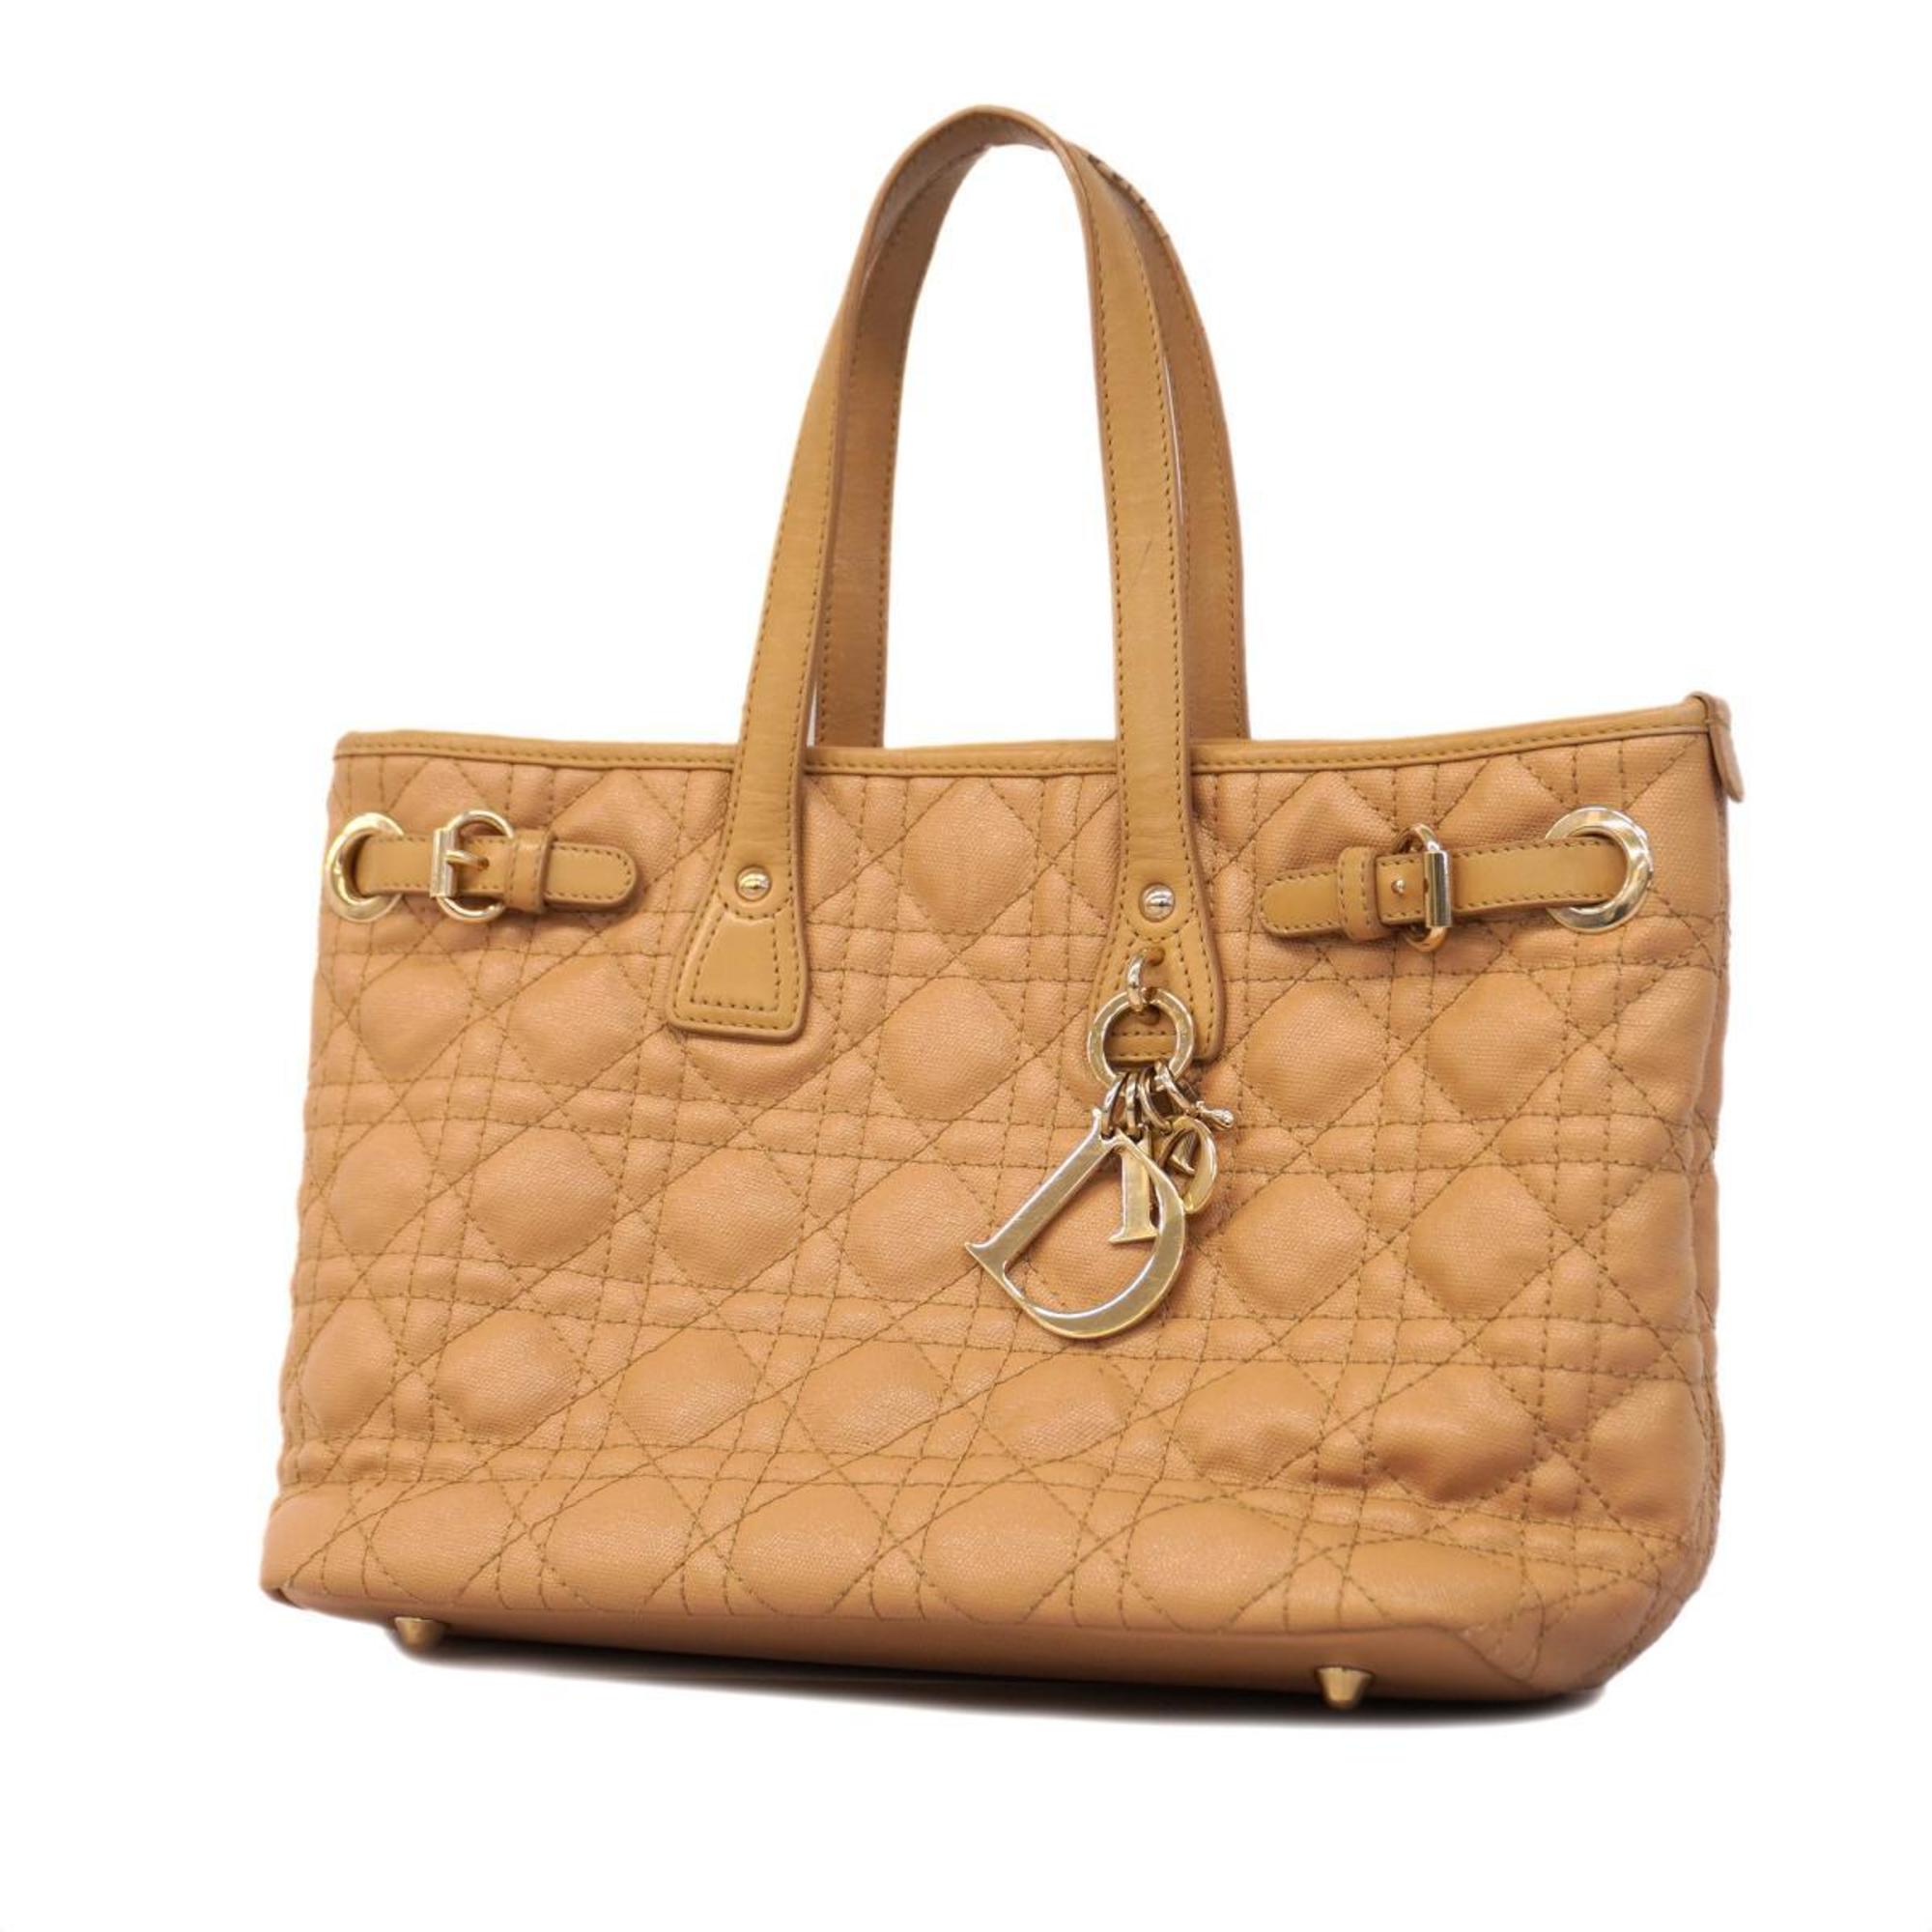 Christian Dior Tote Bag Cannage Beige Champagne Women's